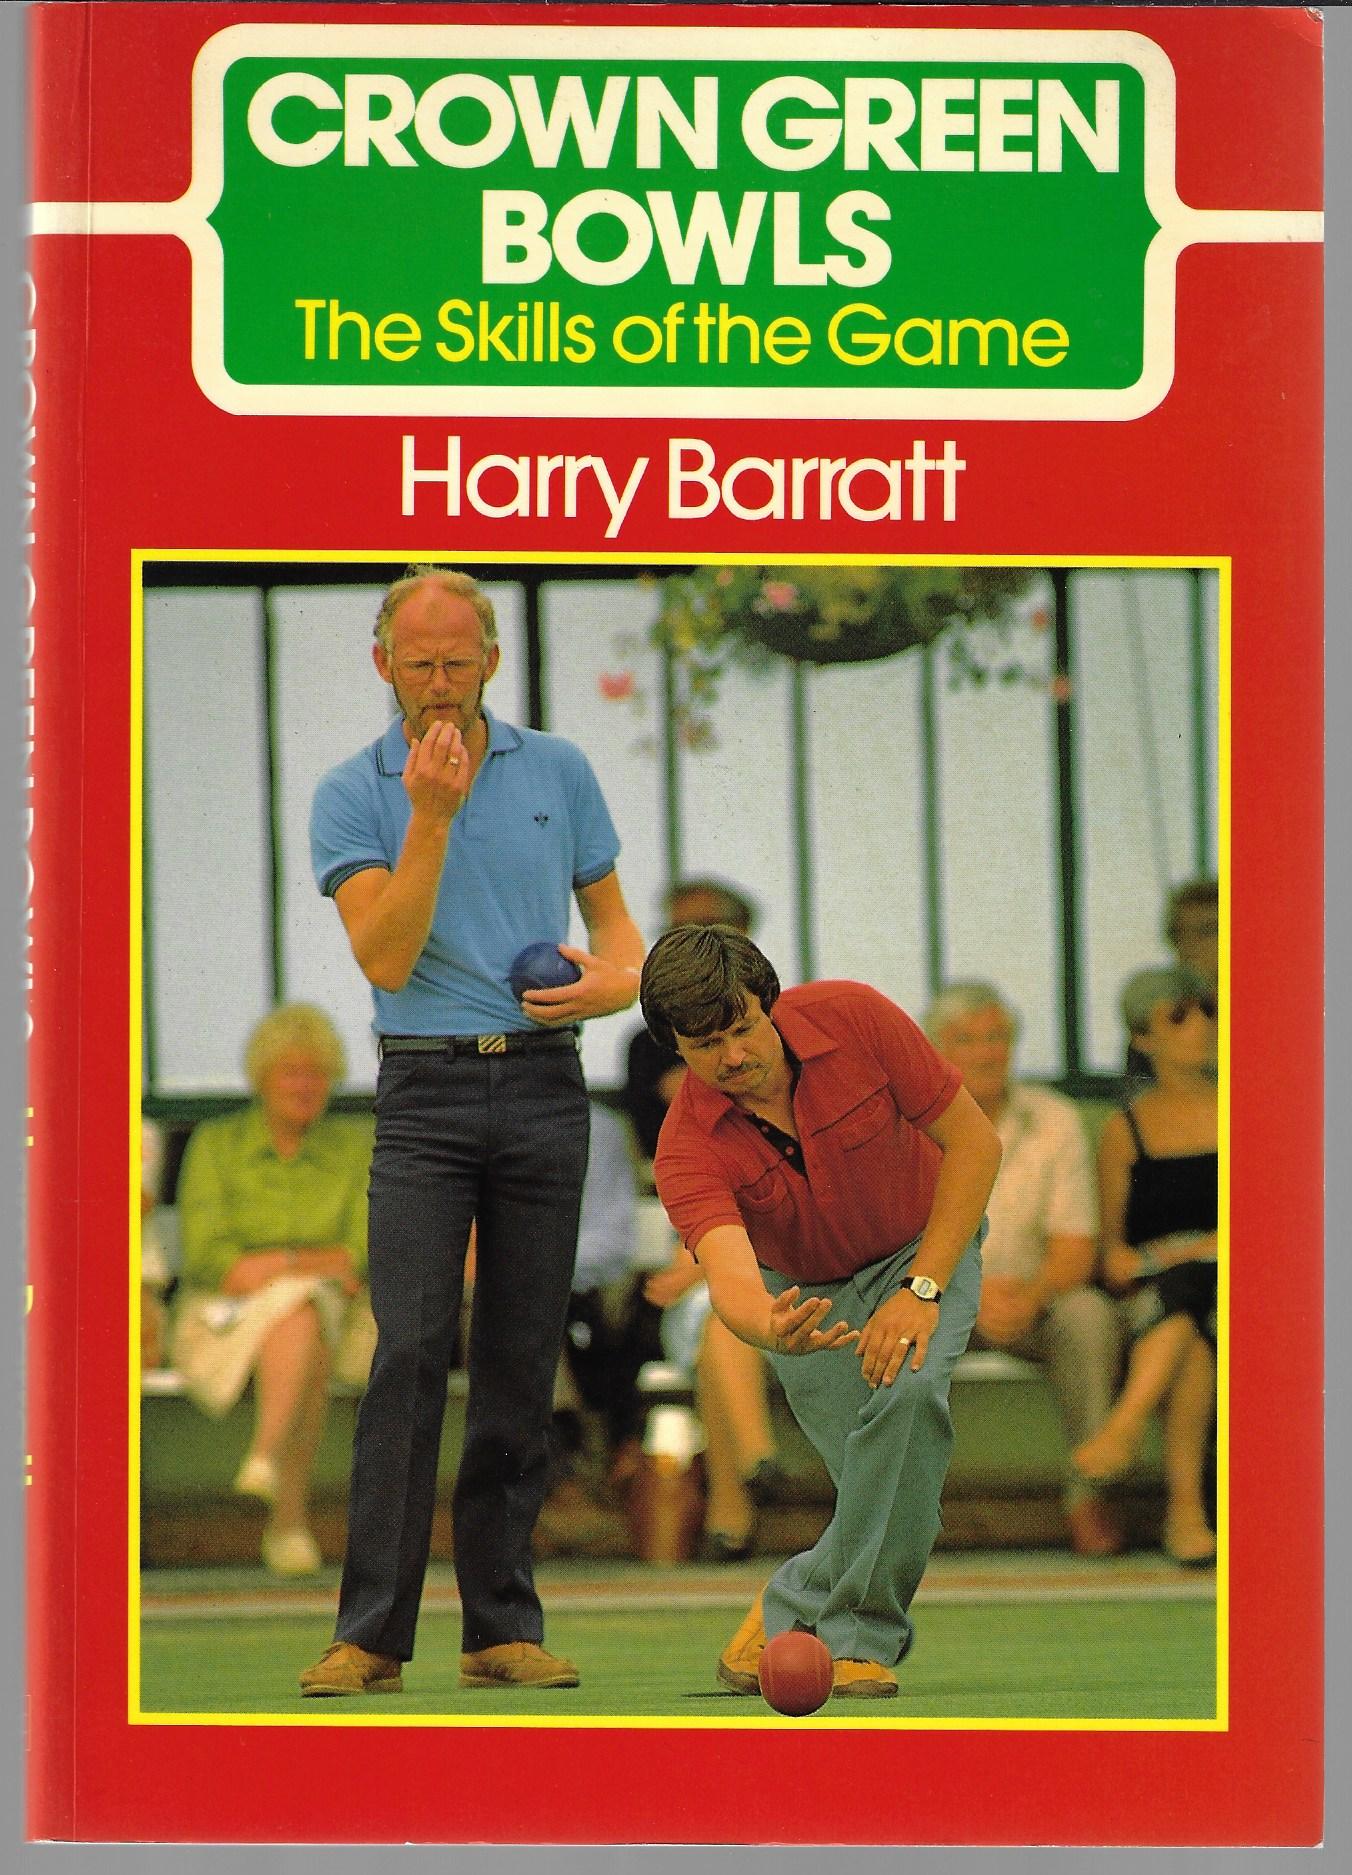 Barratt, Harry - Grown green bowls -The skills of the game